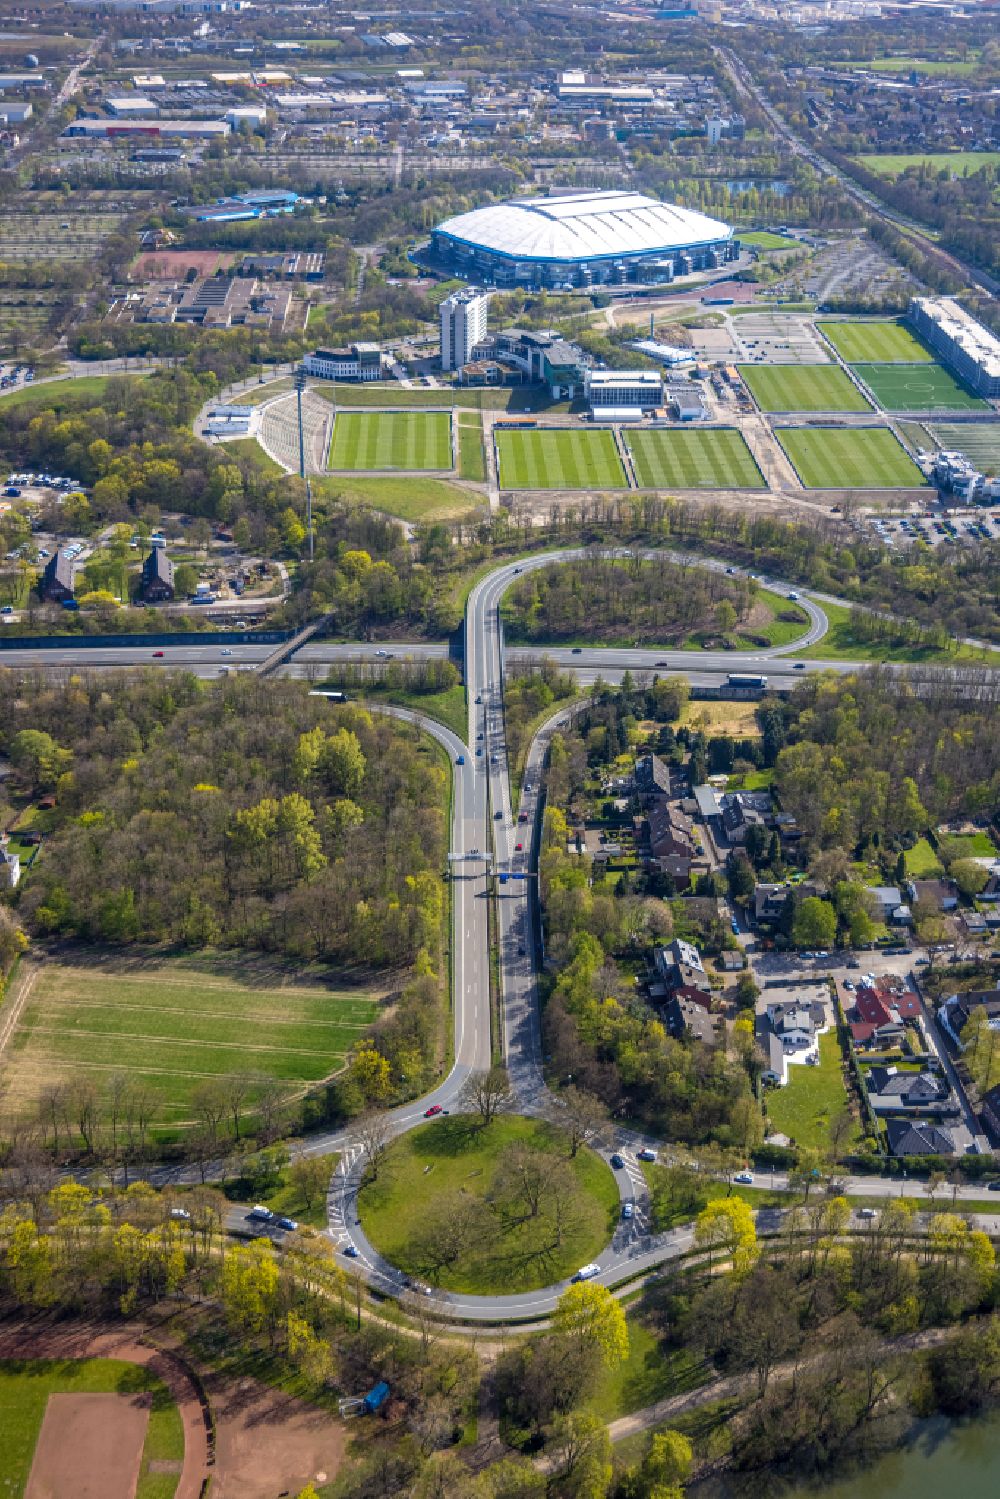 Aerial photograph Gelsenkirchen - Routing and lanes in the course of the motorway exit and access to the BAB A2 and Veltins Arena in Gelsenkirchen in the Ruhr area in the state of North Rhine-Westphalia, Germany